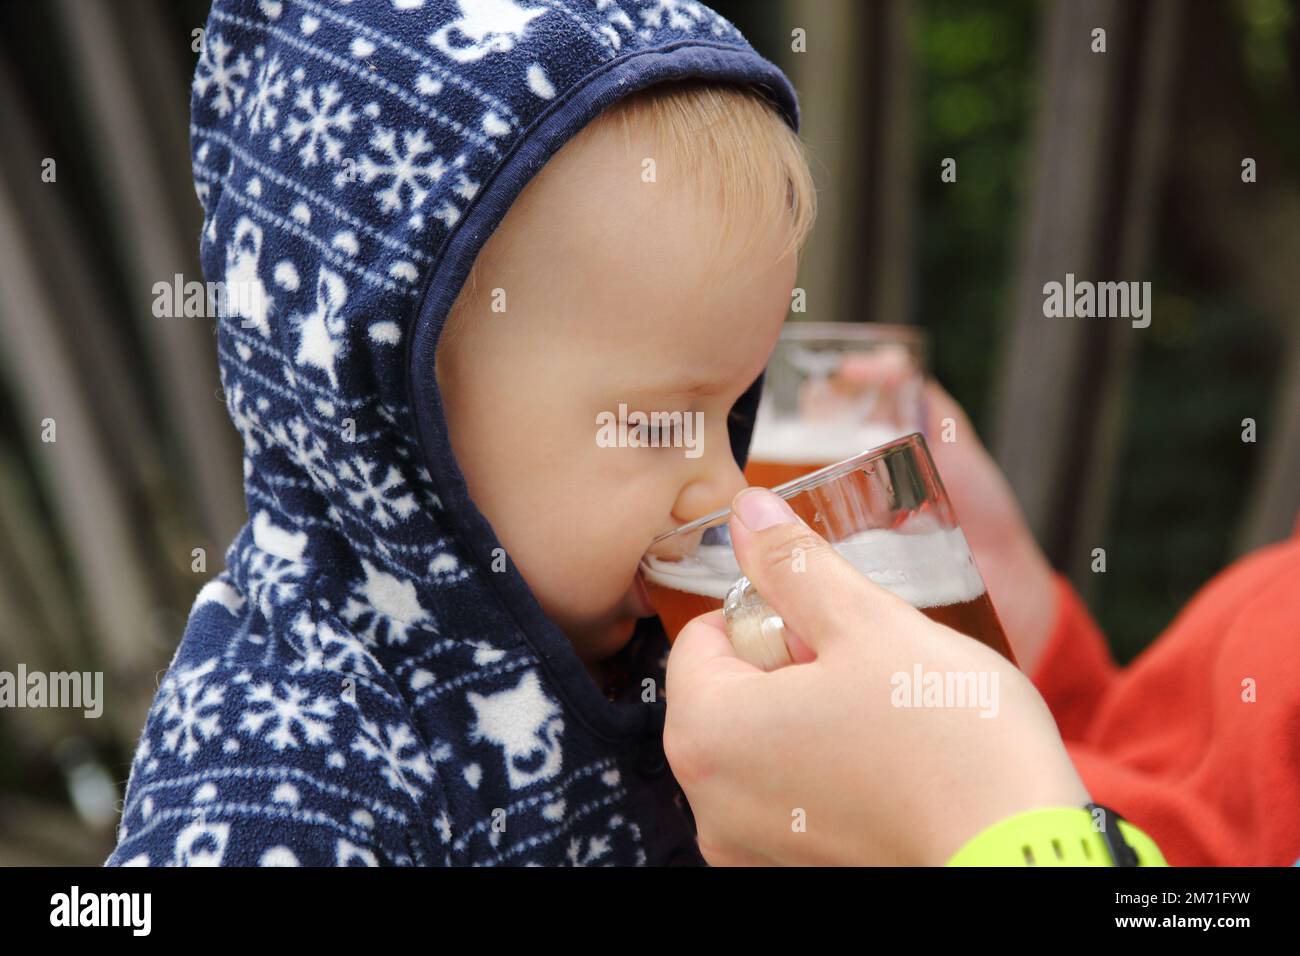 A small kid drinking beer (alcohol) from a glass in hand of adult Stock Photo